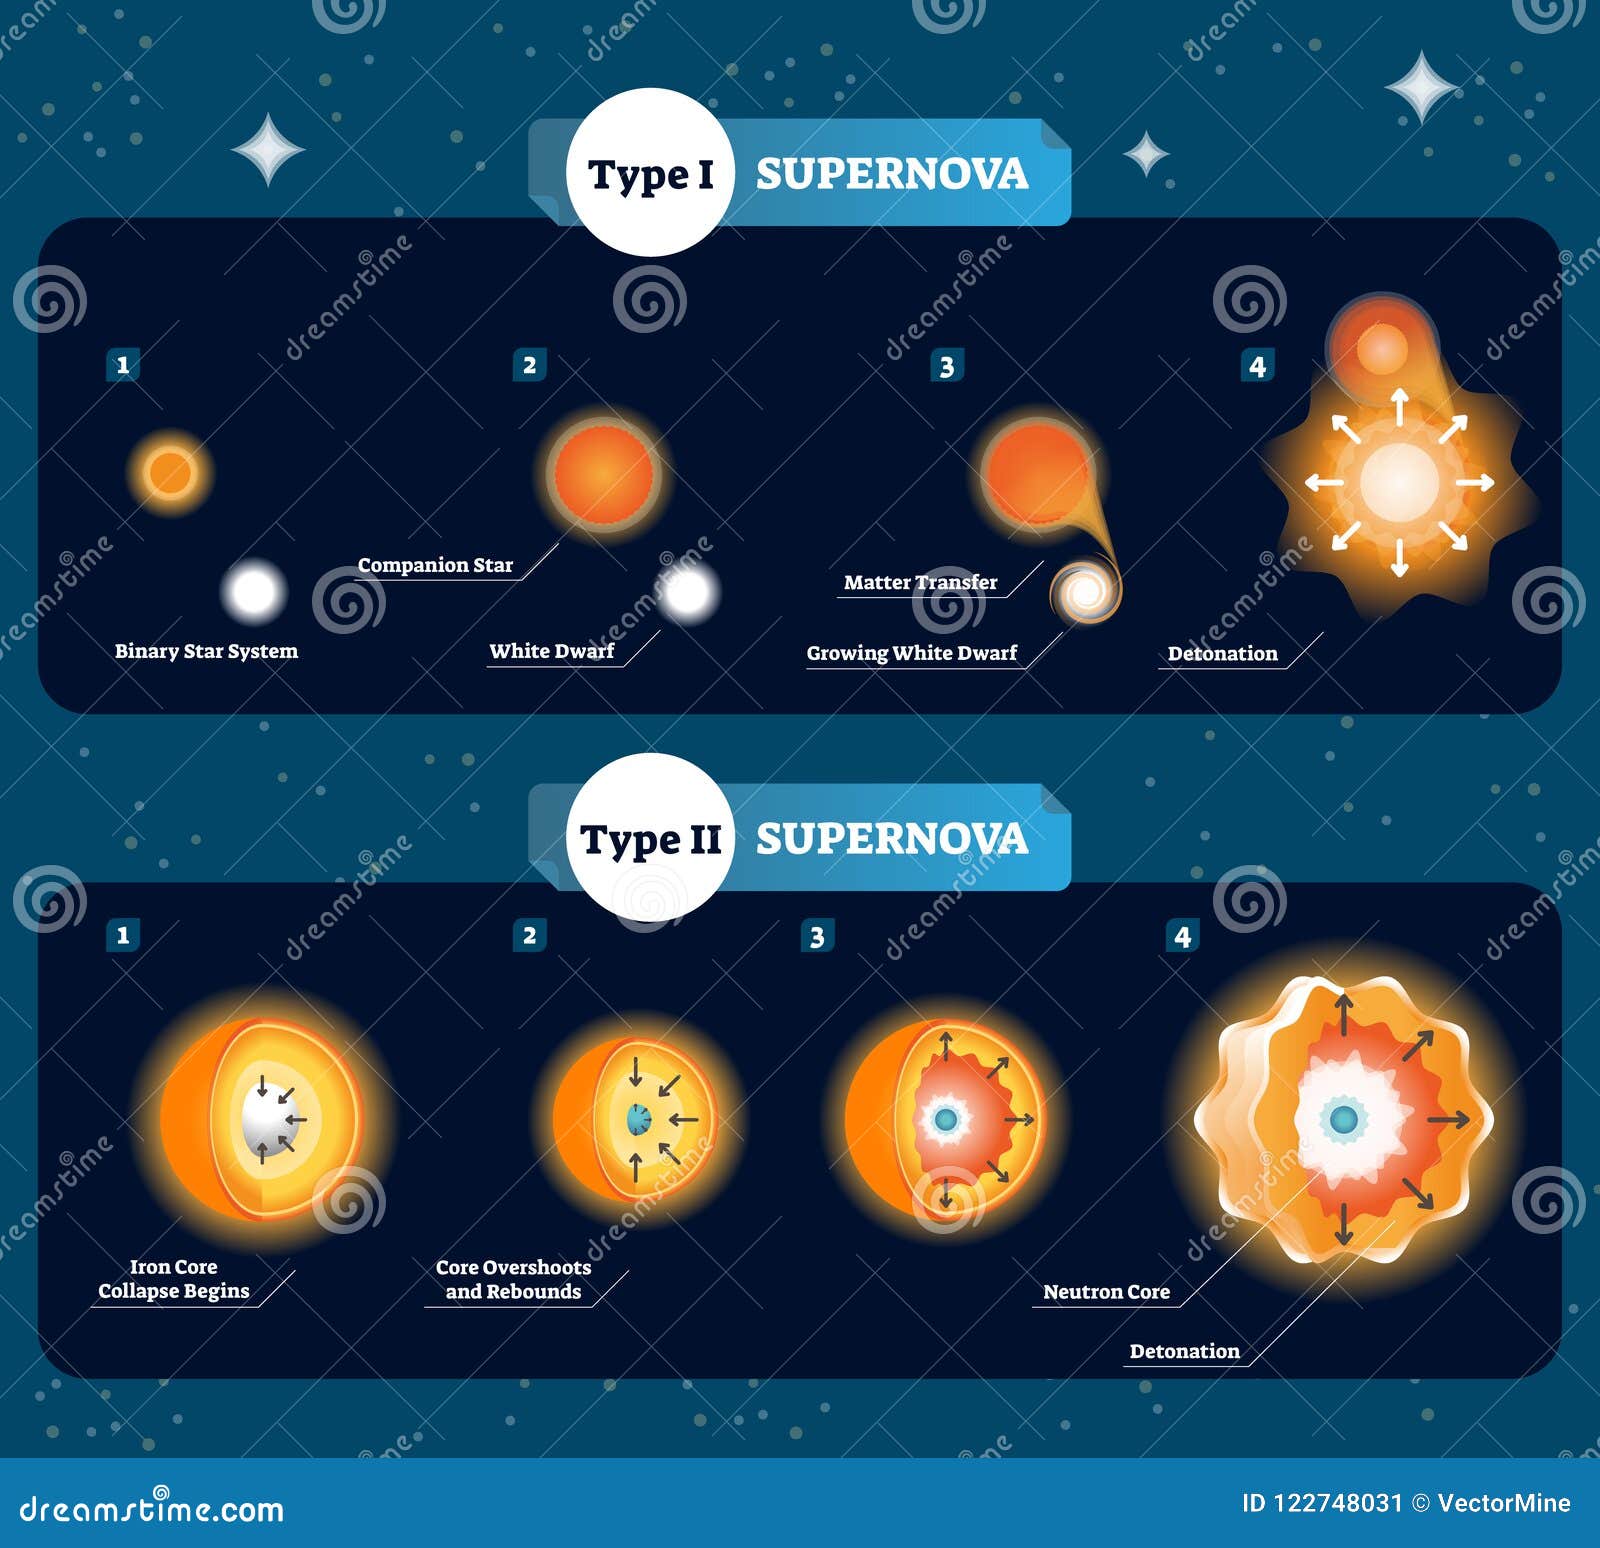 supernova  . how stars become to big bang and explosion. explained companion star, matter transfer and dwarf.